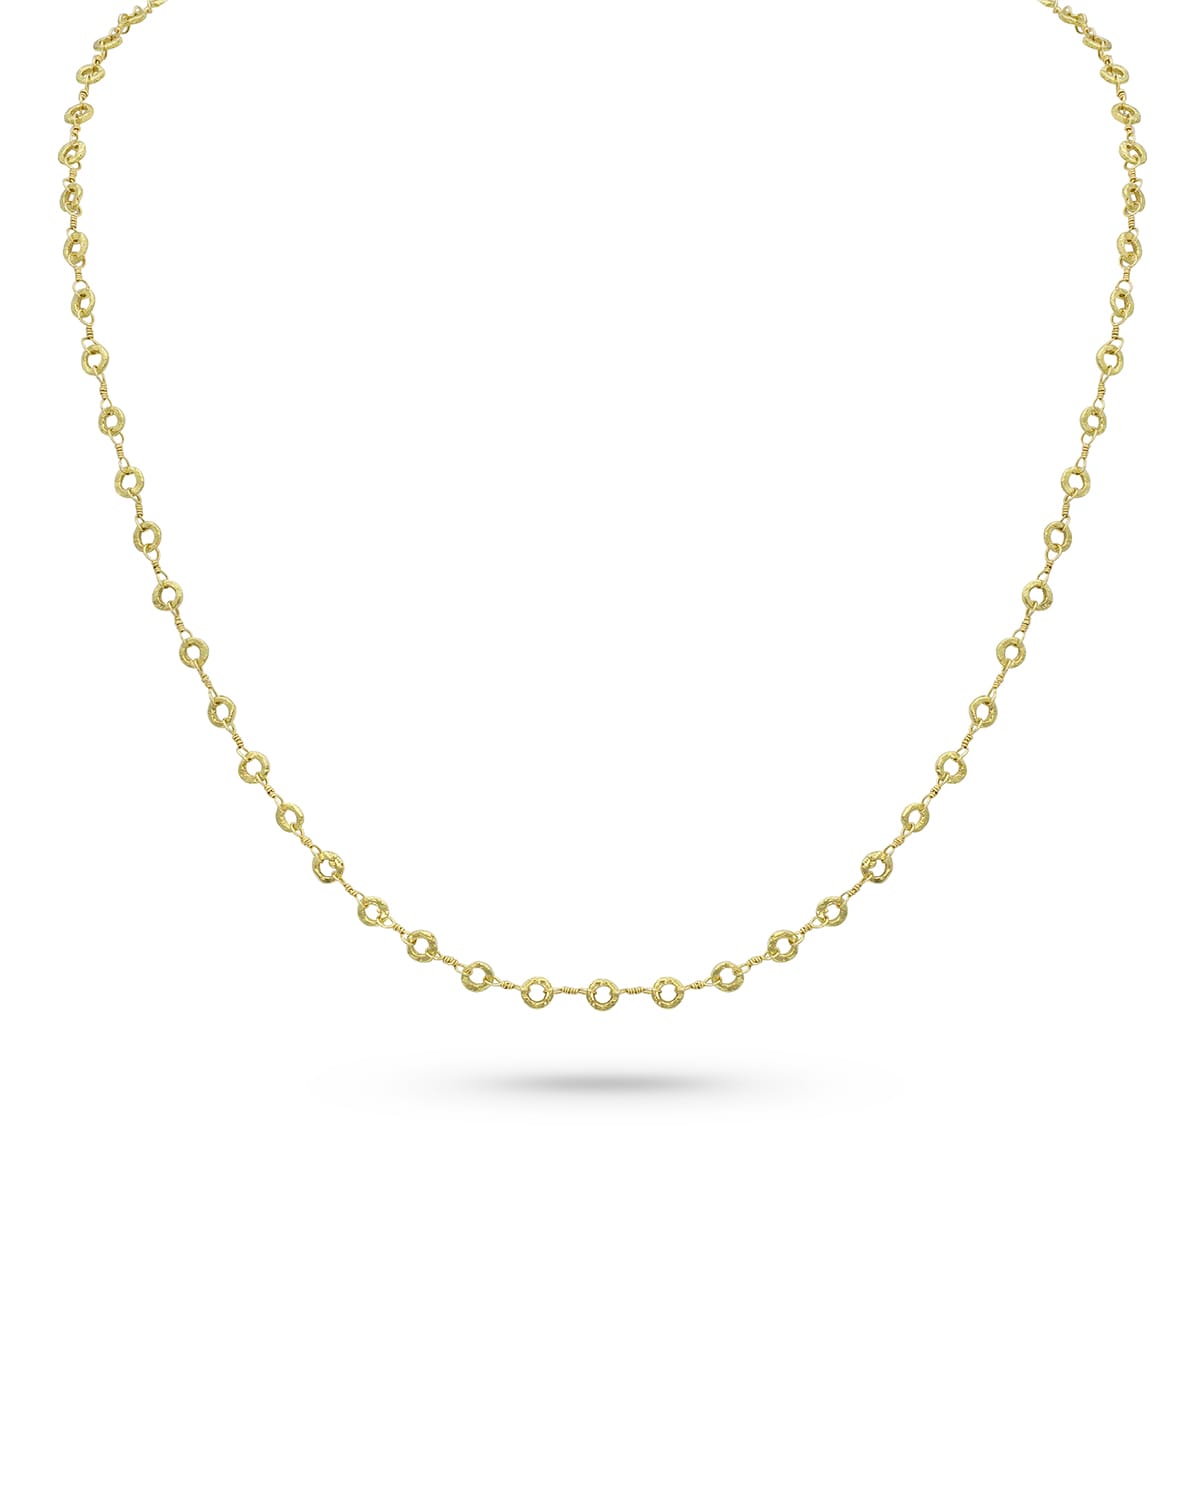 Dominique Cohen 18k Yellow Gold Carved Ring Delicate Chain Necklace, 22"L